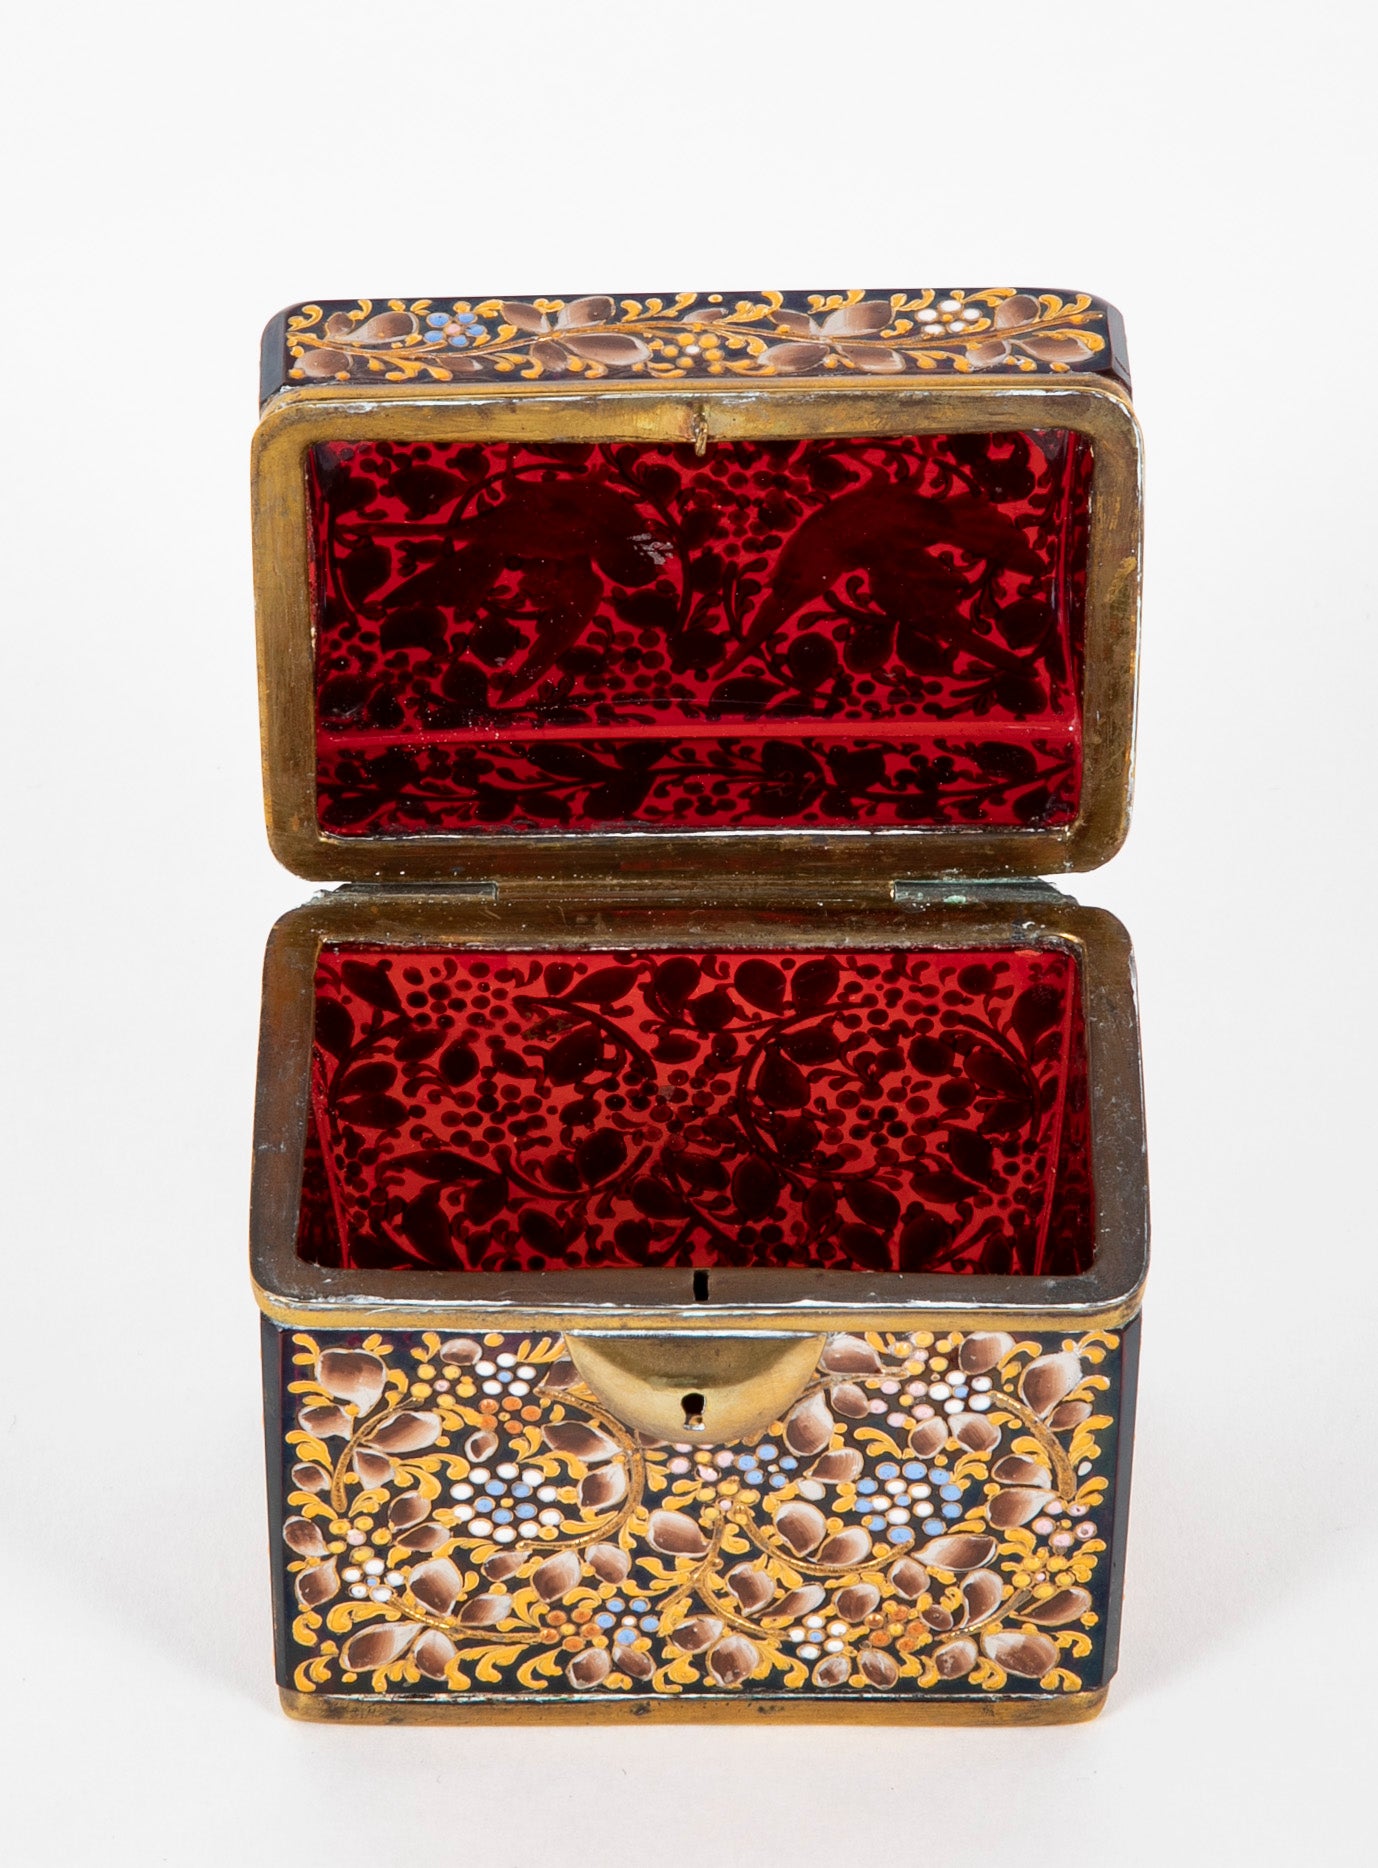 A 19th Century Moser Enameled Glass Box